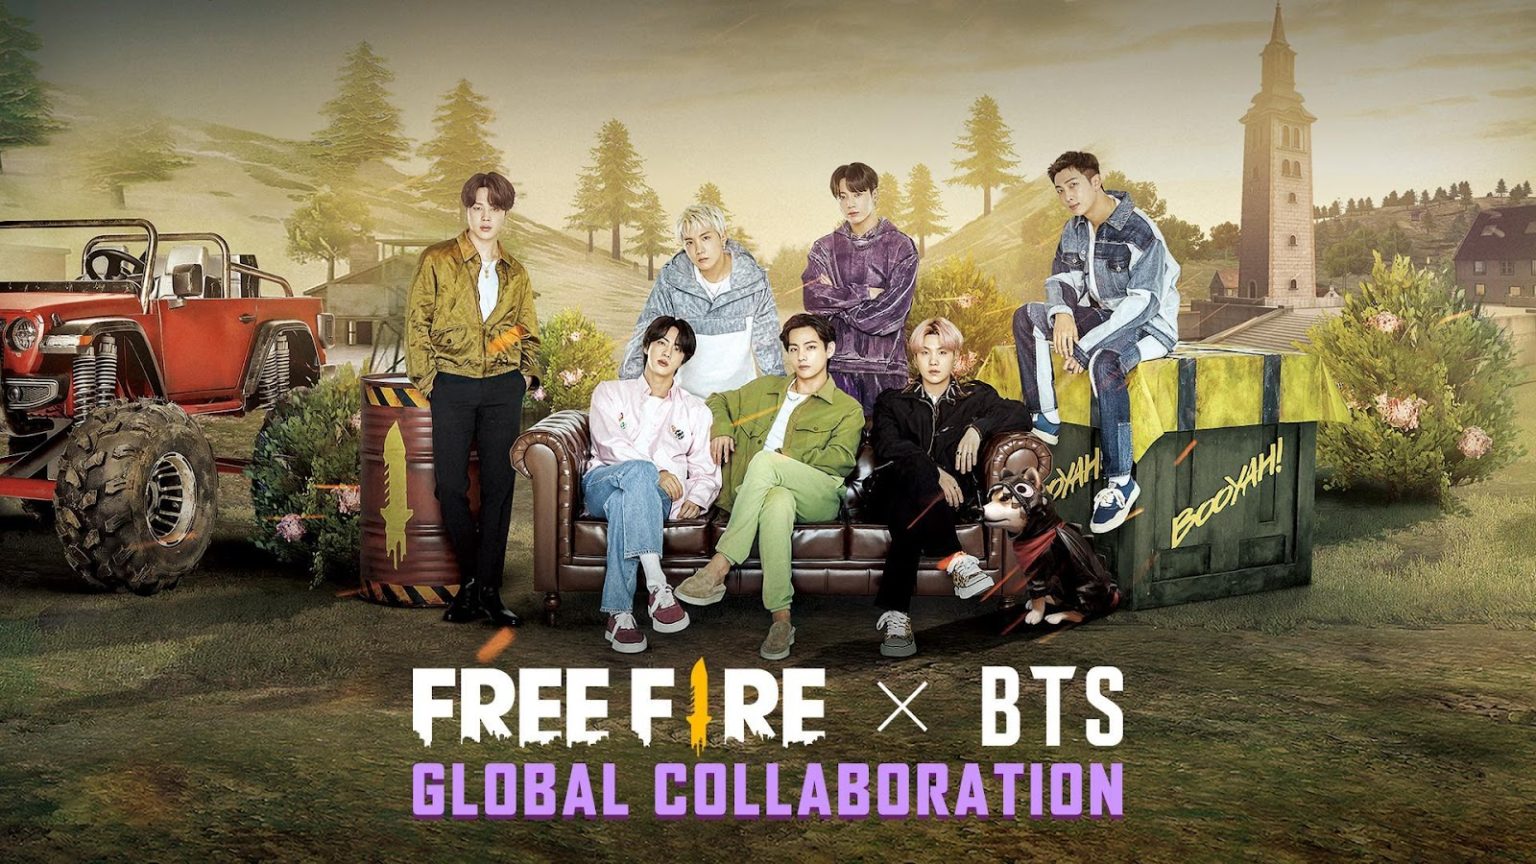 Unique bts emotes and skins are coming to free fire as part of a collaboration with the k-pop group